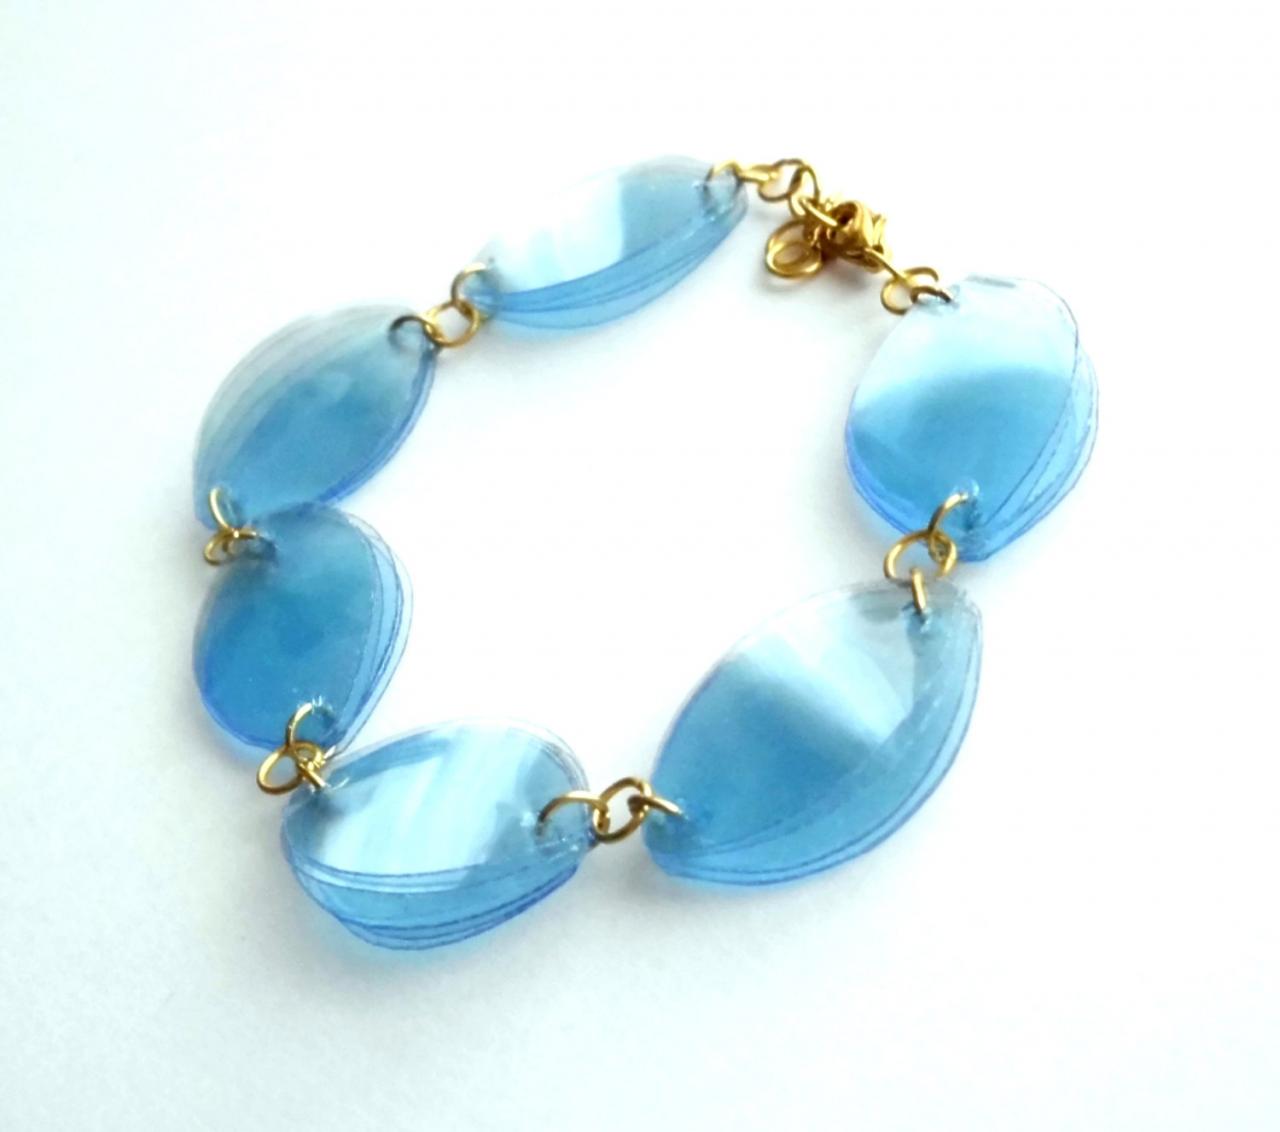 Blue Eco-friendly Bracelet Made Of Recycled Plastic Bottles - Upcycled Jewelry, Golden & Pastel Blue, Eco Chic, Lovely Gift